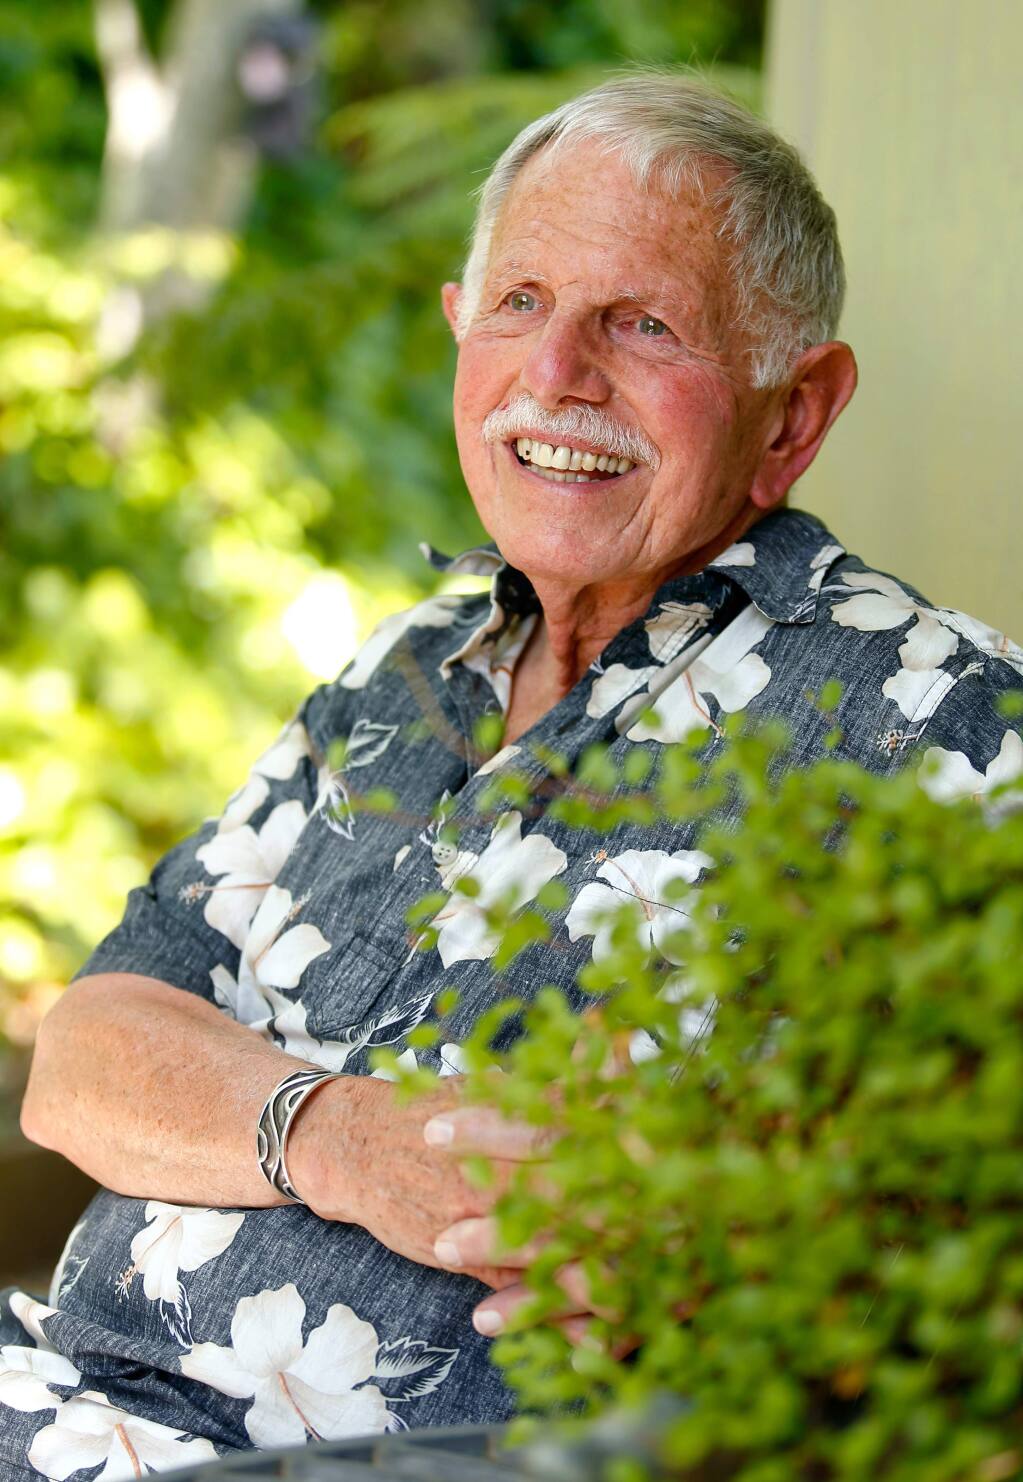 Gary 'Buz' Hermes, 77, has been an advocate for LGBTQ seniors for years, working to raise awareness about the challenges of elderly members in the LGBTQ community, at his home in Sonoma, California on Friday, May 27, 2016. (Alvin Jornada / The Press Democrat)